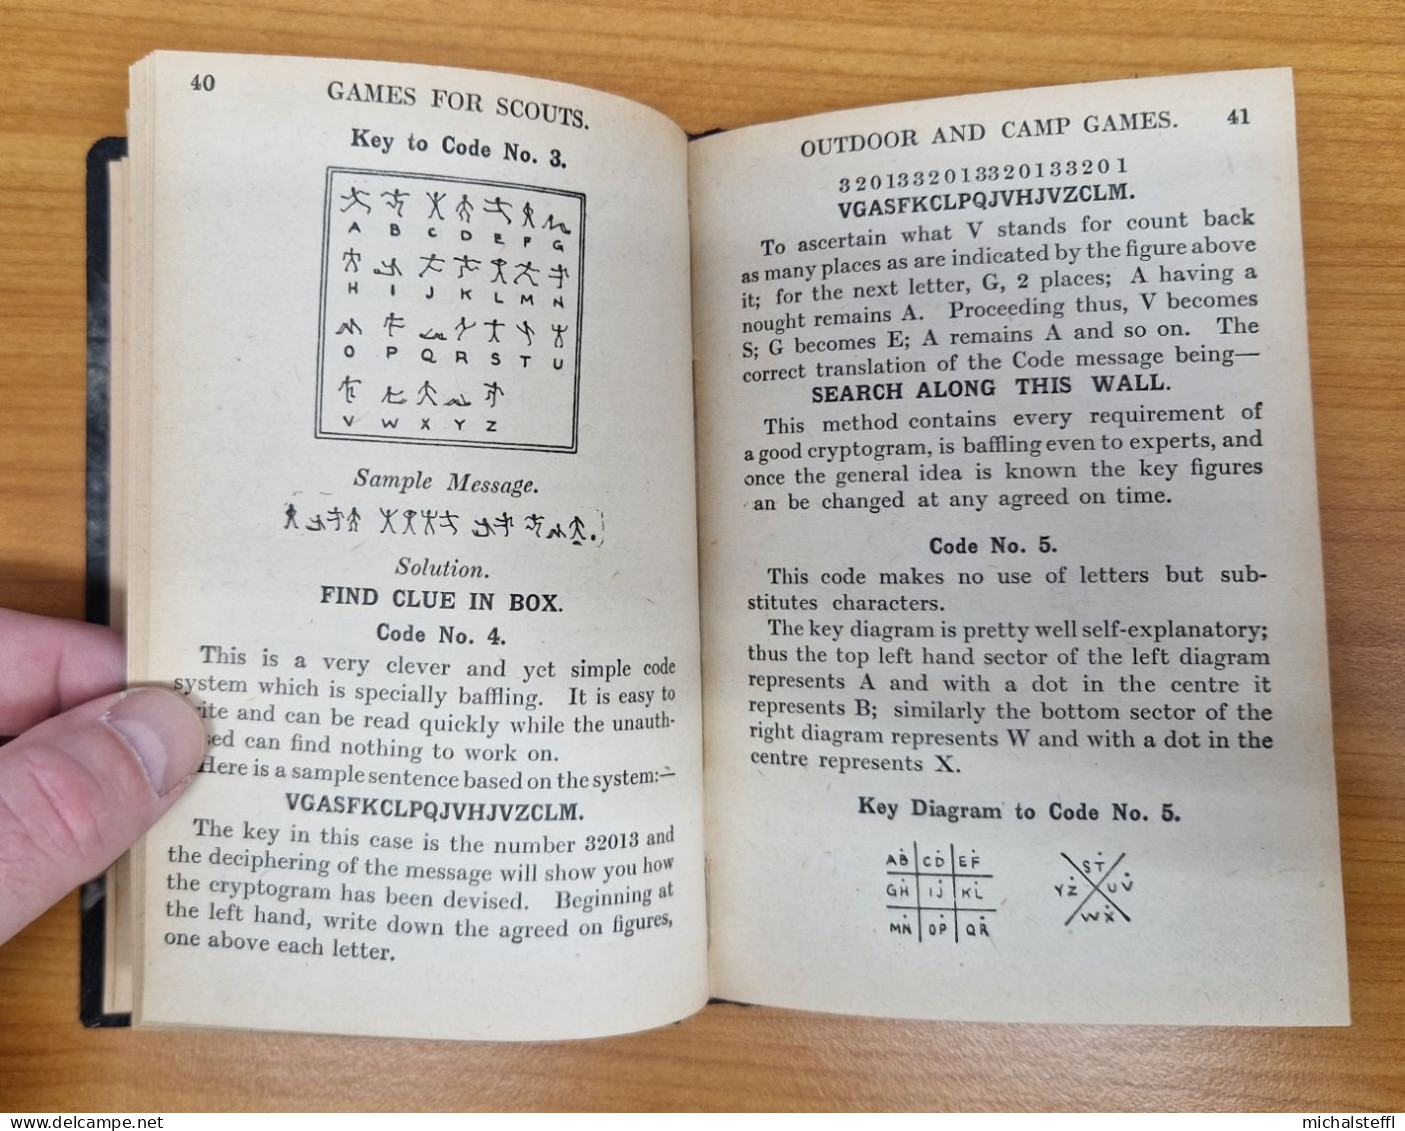 Games For Scouts, Mackenzie, A W N, 1943 - Scouts